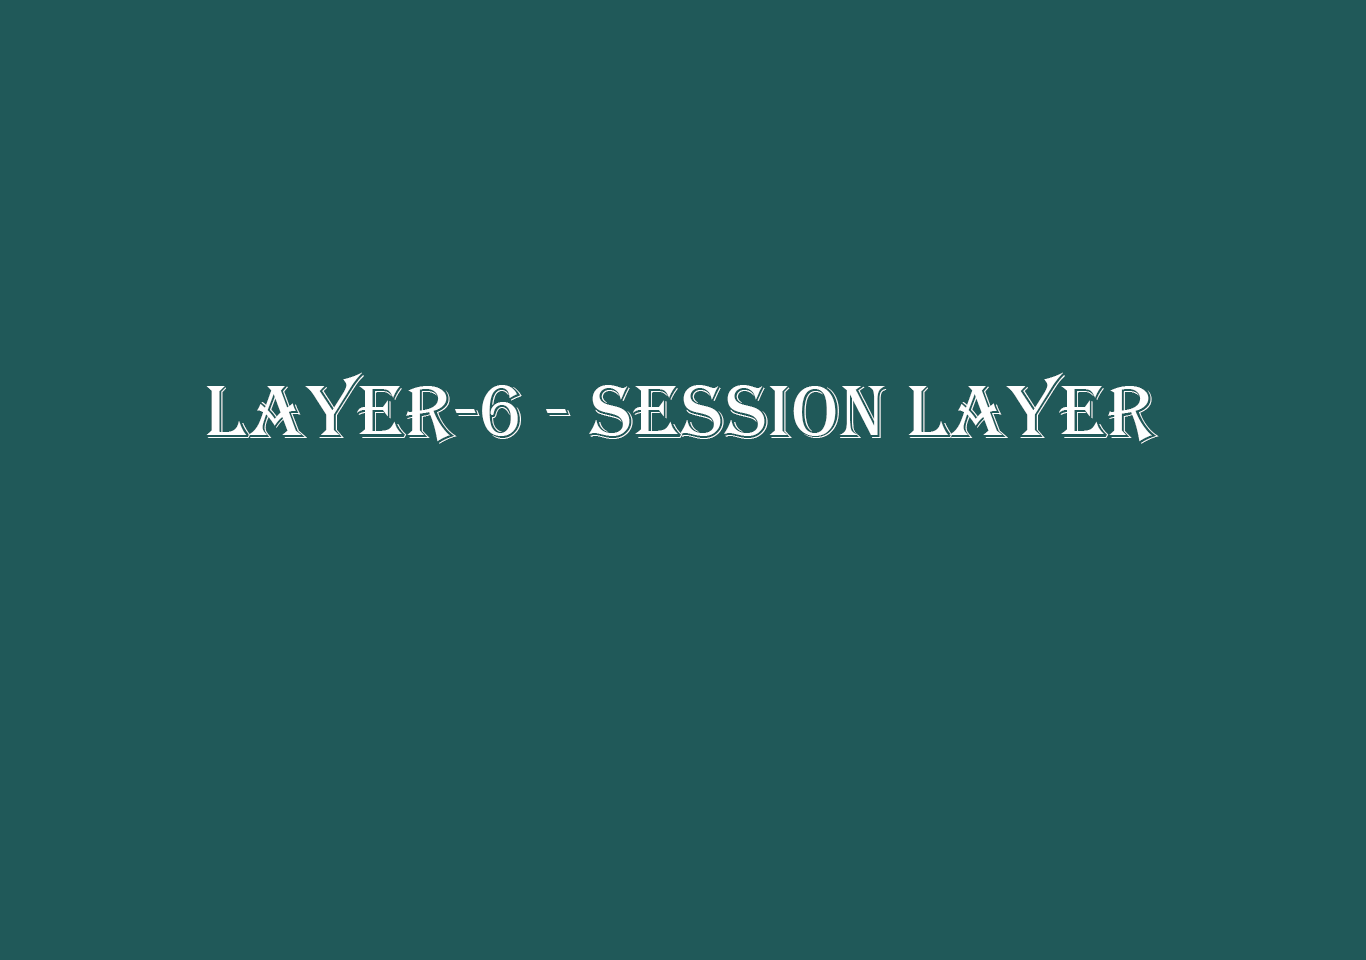 Session layer